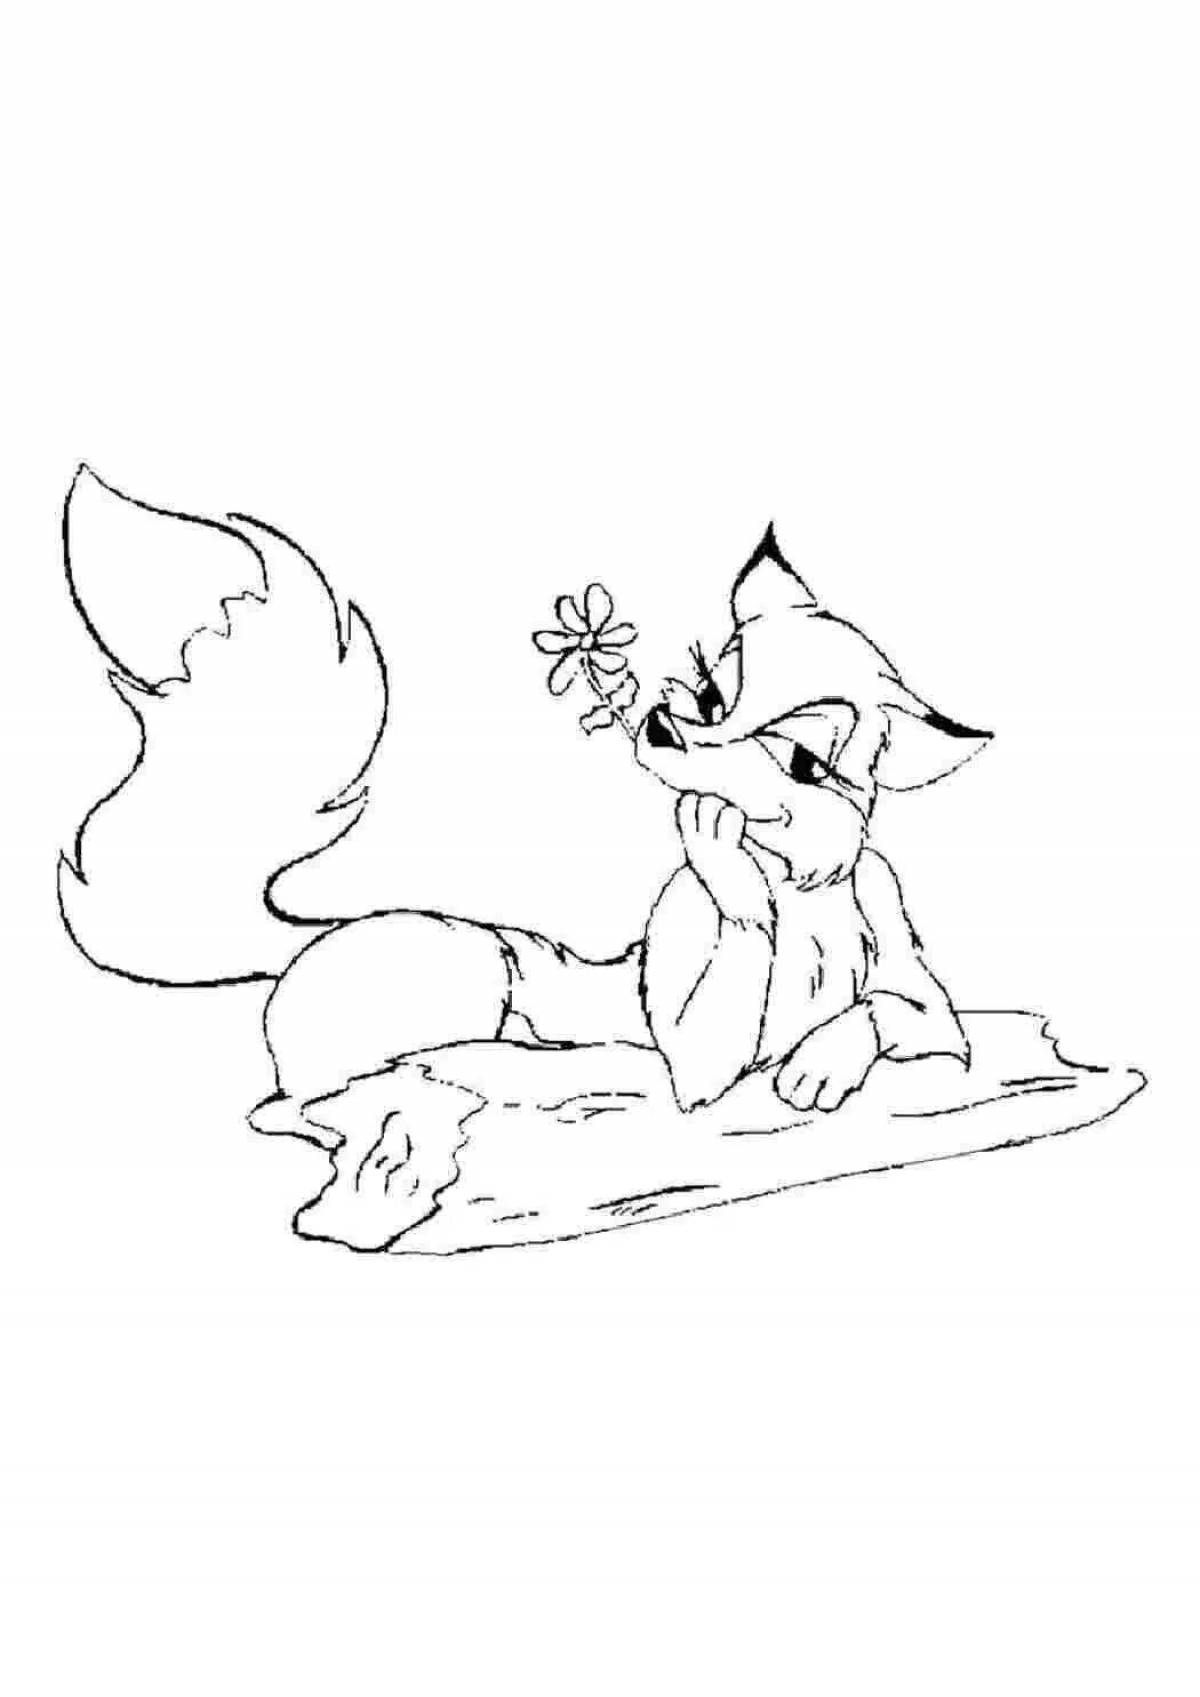 Exquisite fox coloring book for kids